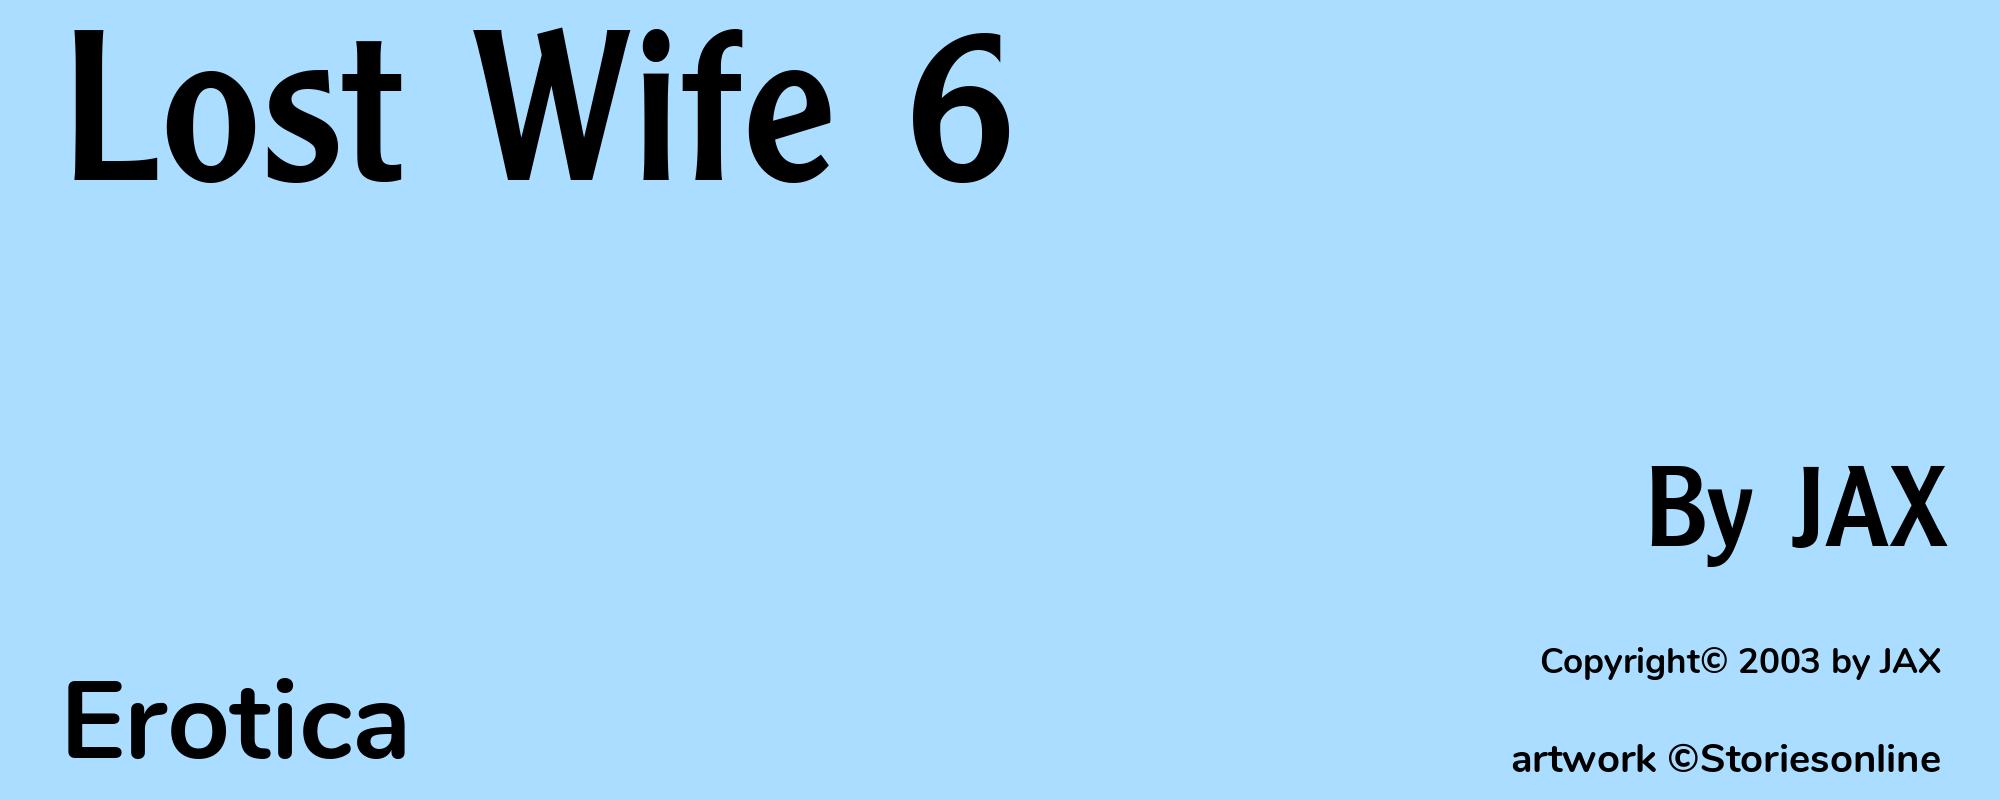 Lost Wife 6 - Cover